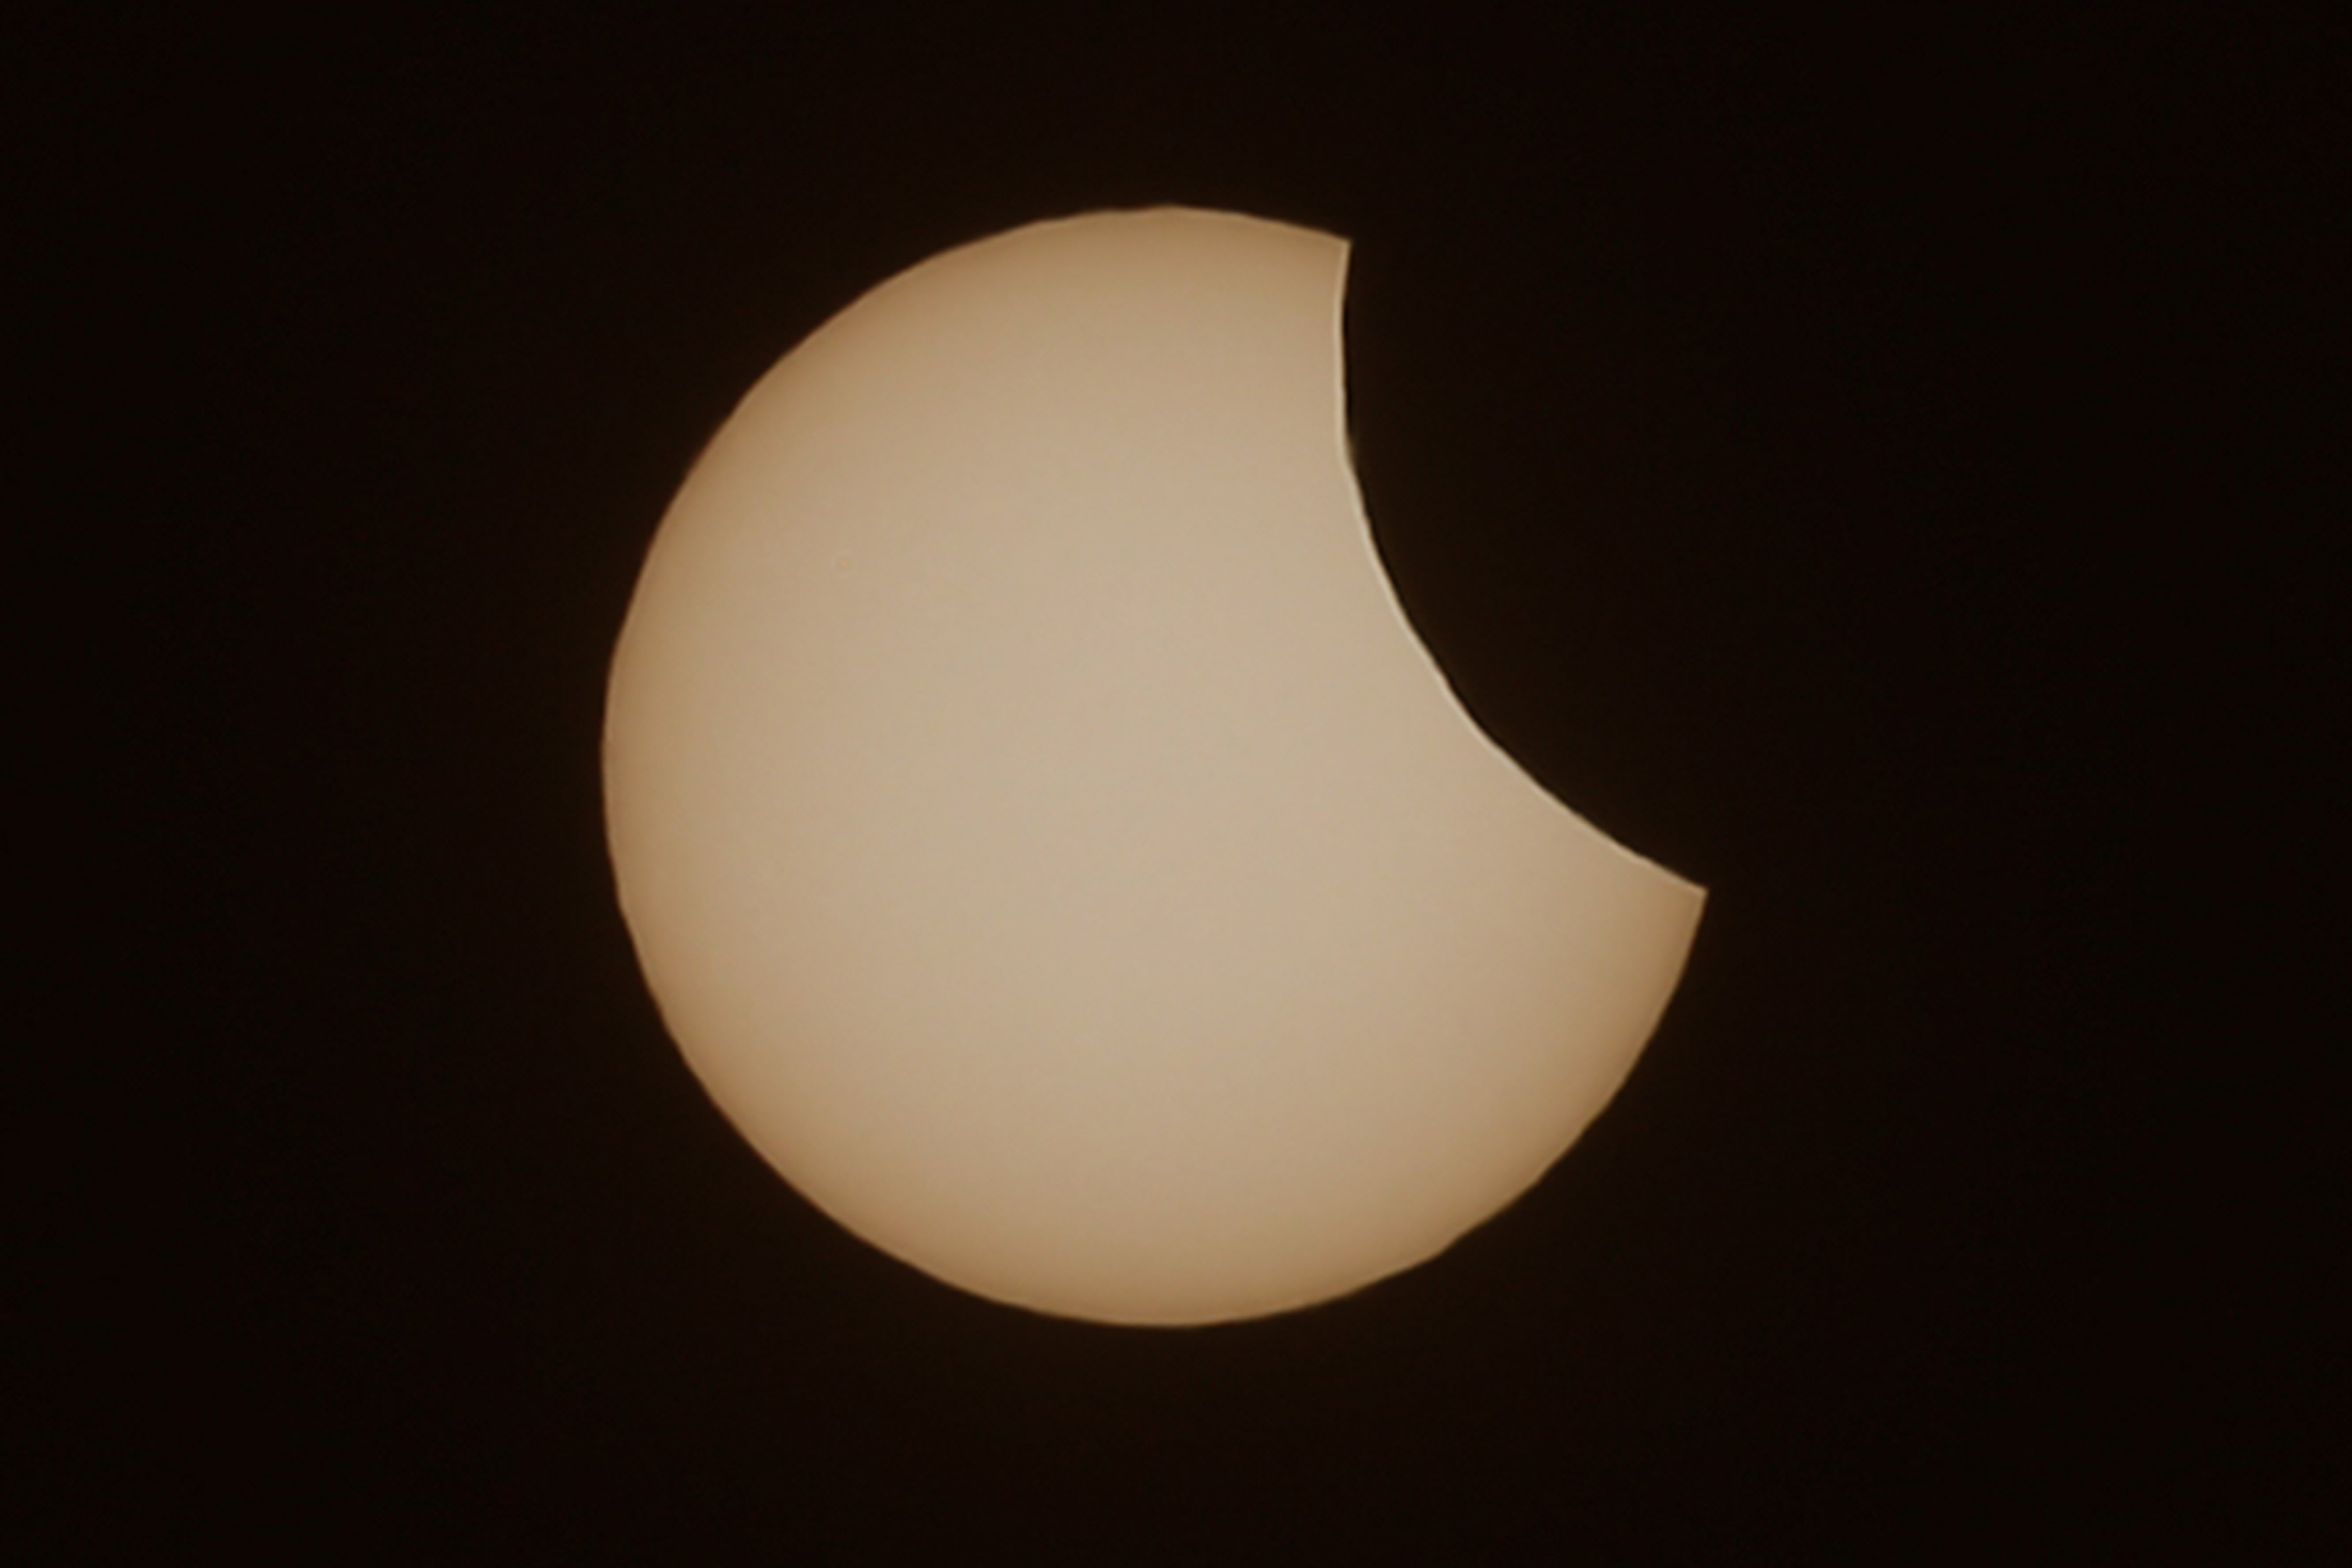 MUNICH, GERMANY - MARCH 20: The sun is pictured during a partial solar eclipse on March 20, 2015 in Muncih, Germany. (Alexander Hassenstein&mdash;Getty Images)